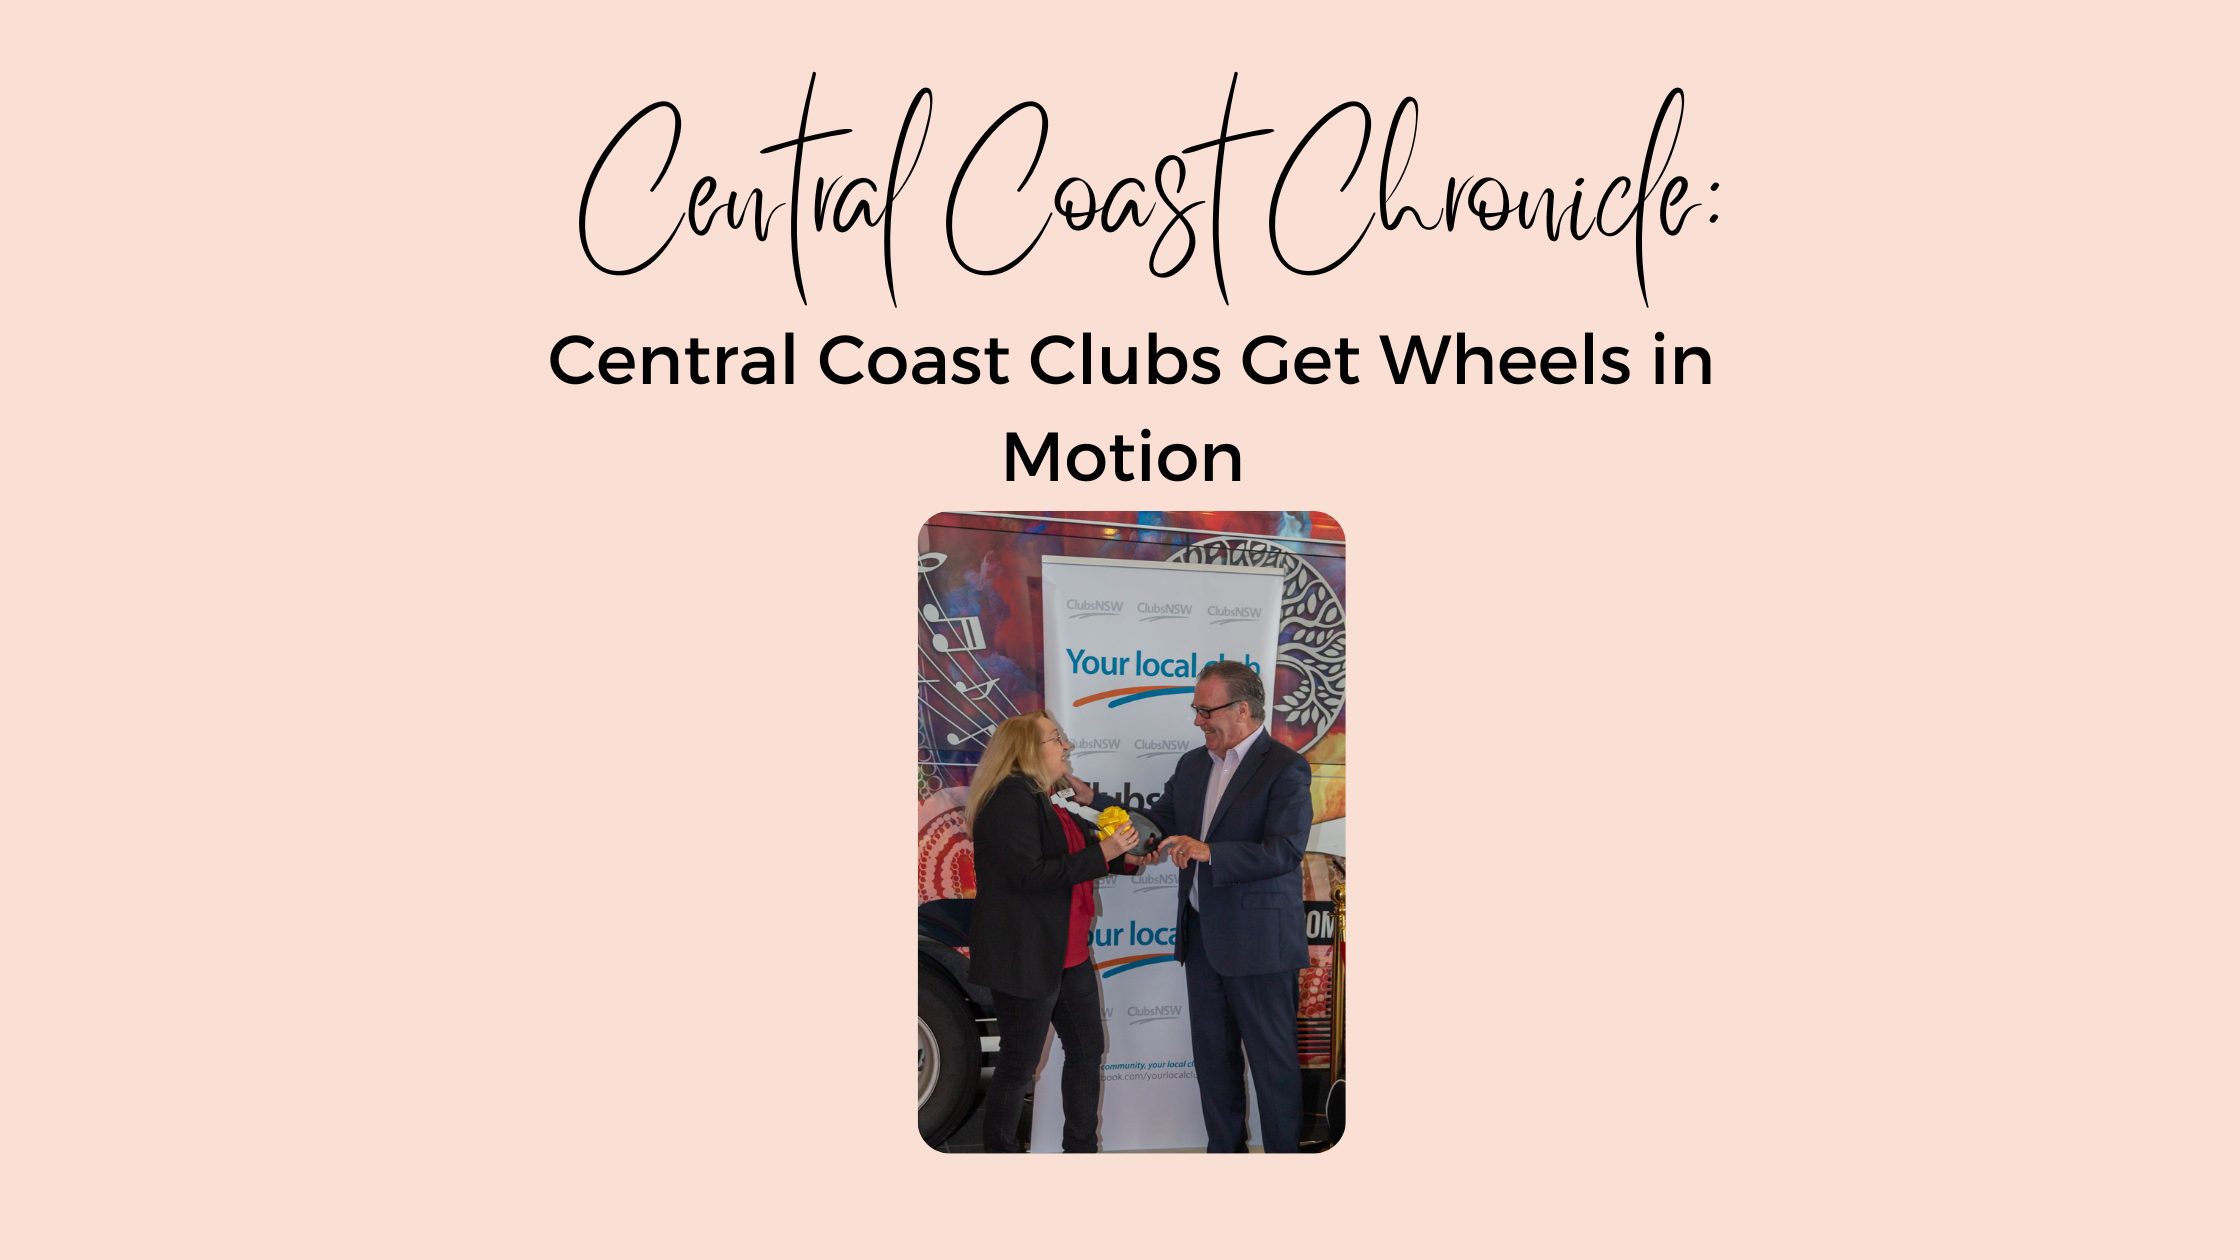 Central Coast Clubs gets wheels in motion